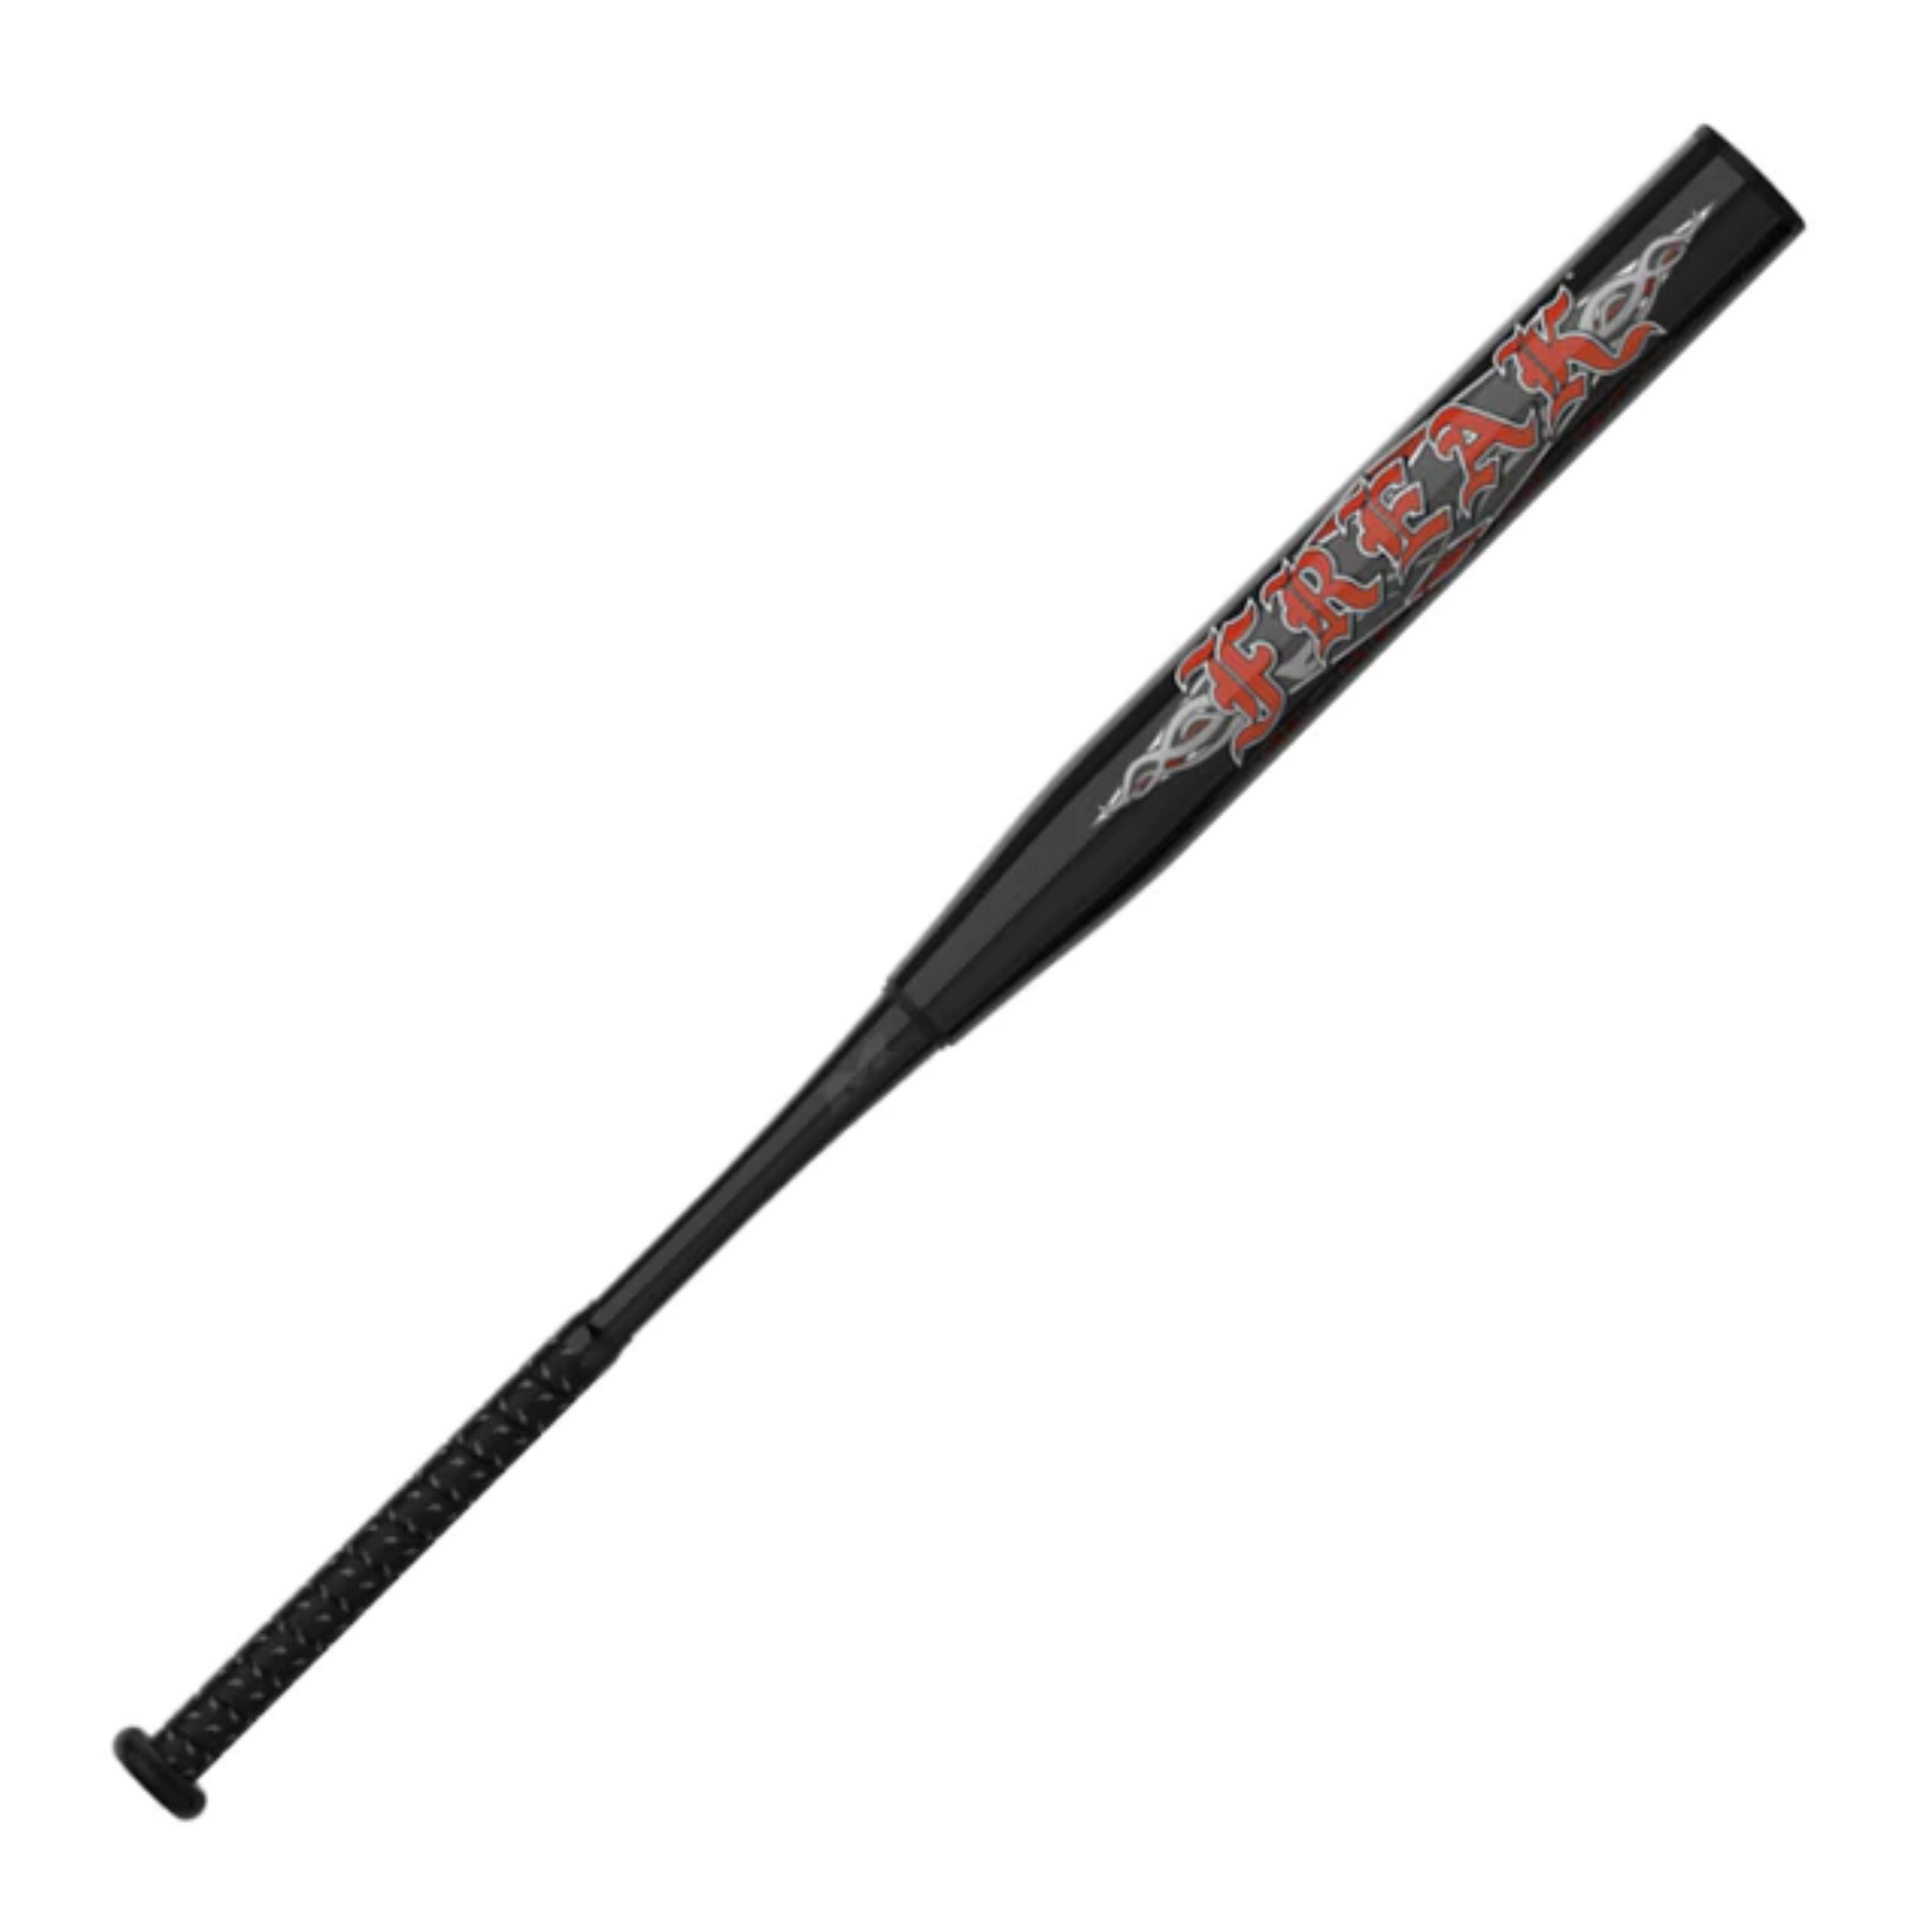 A photo of the Miken Freak OG 13.5" Barrel 25th Anniversary 2pc Balanced USSSA Slo-Pitch Bat front view.